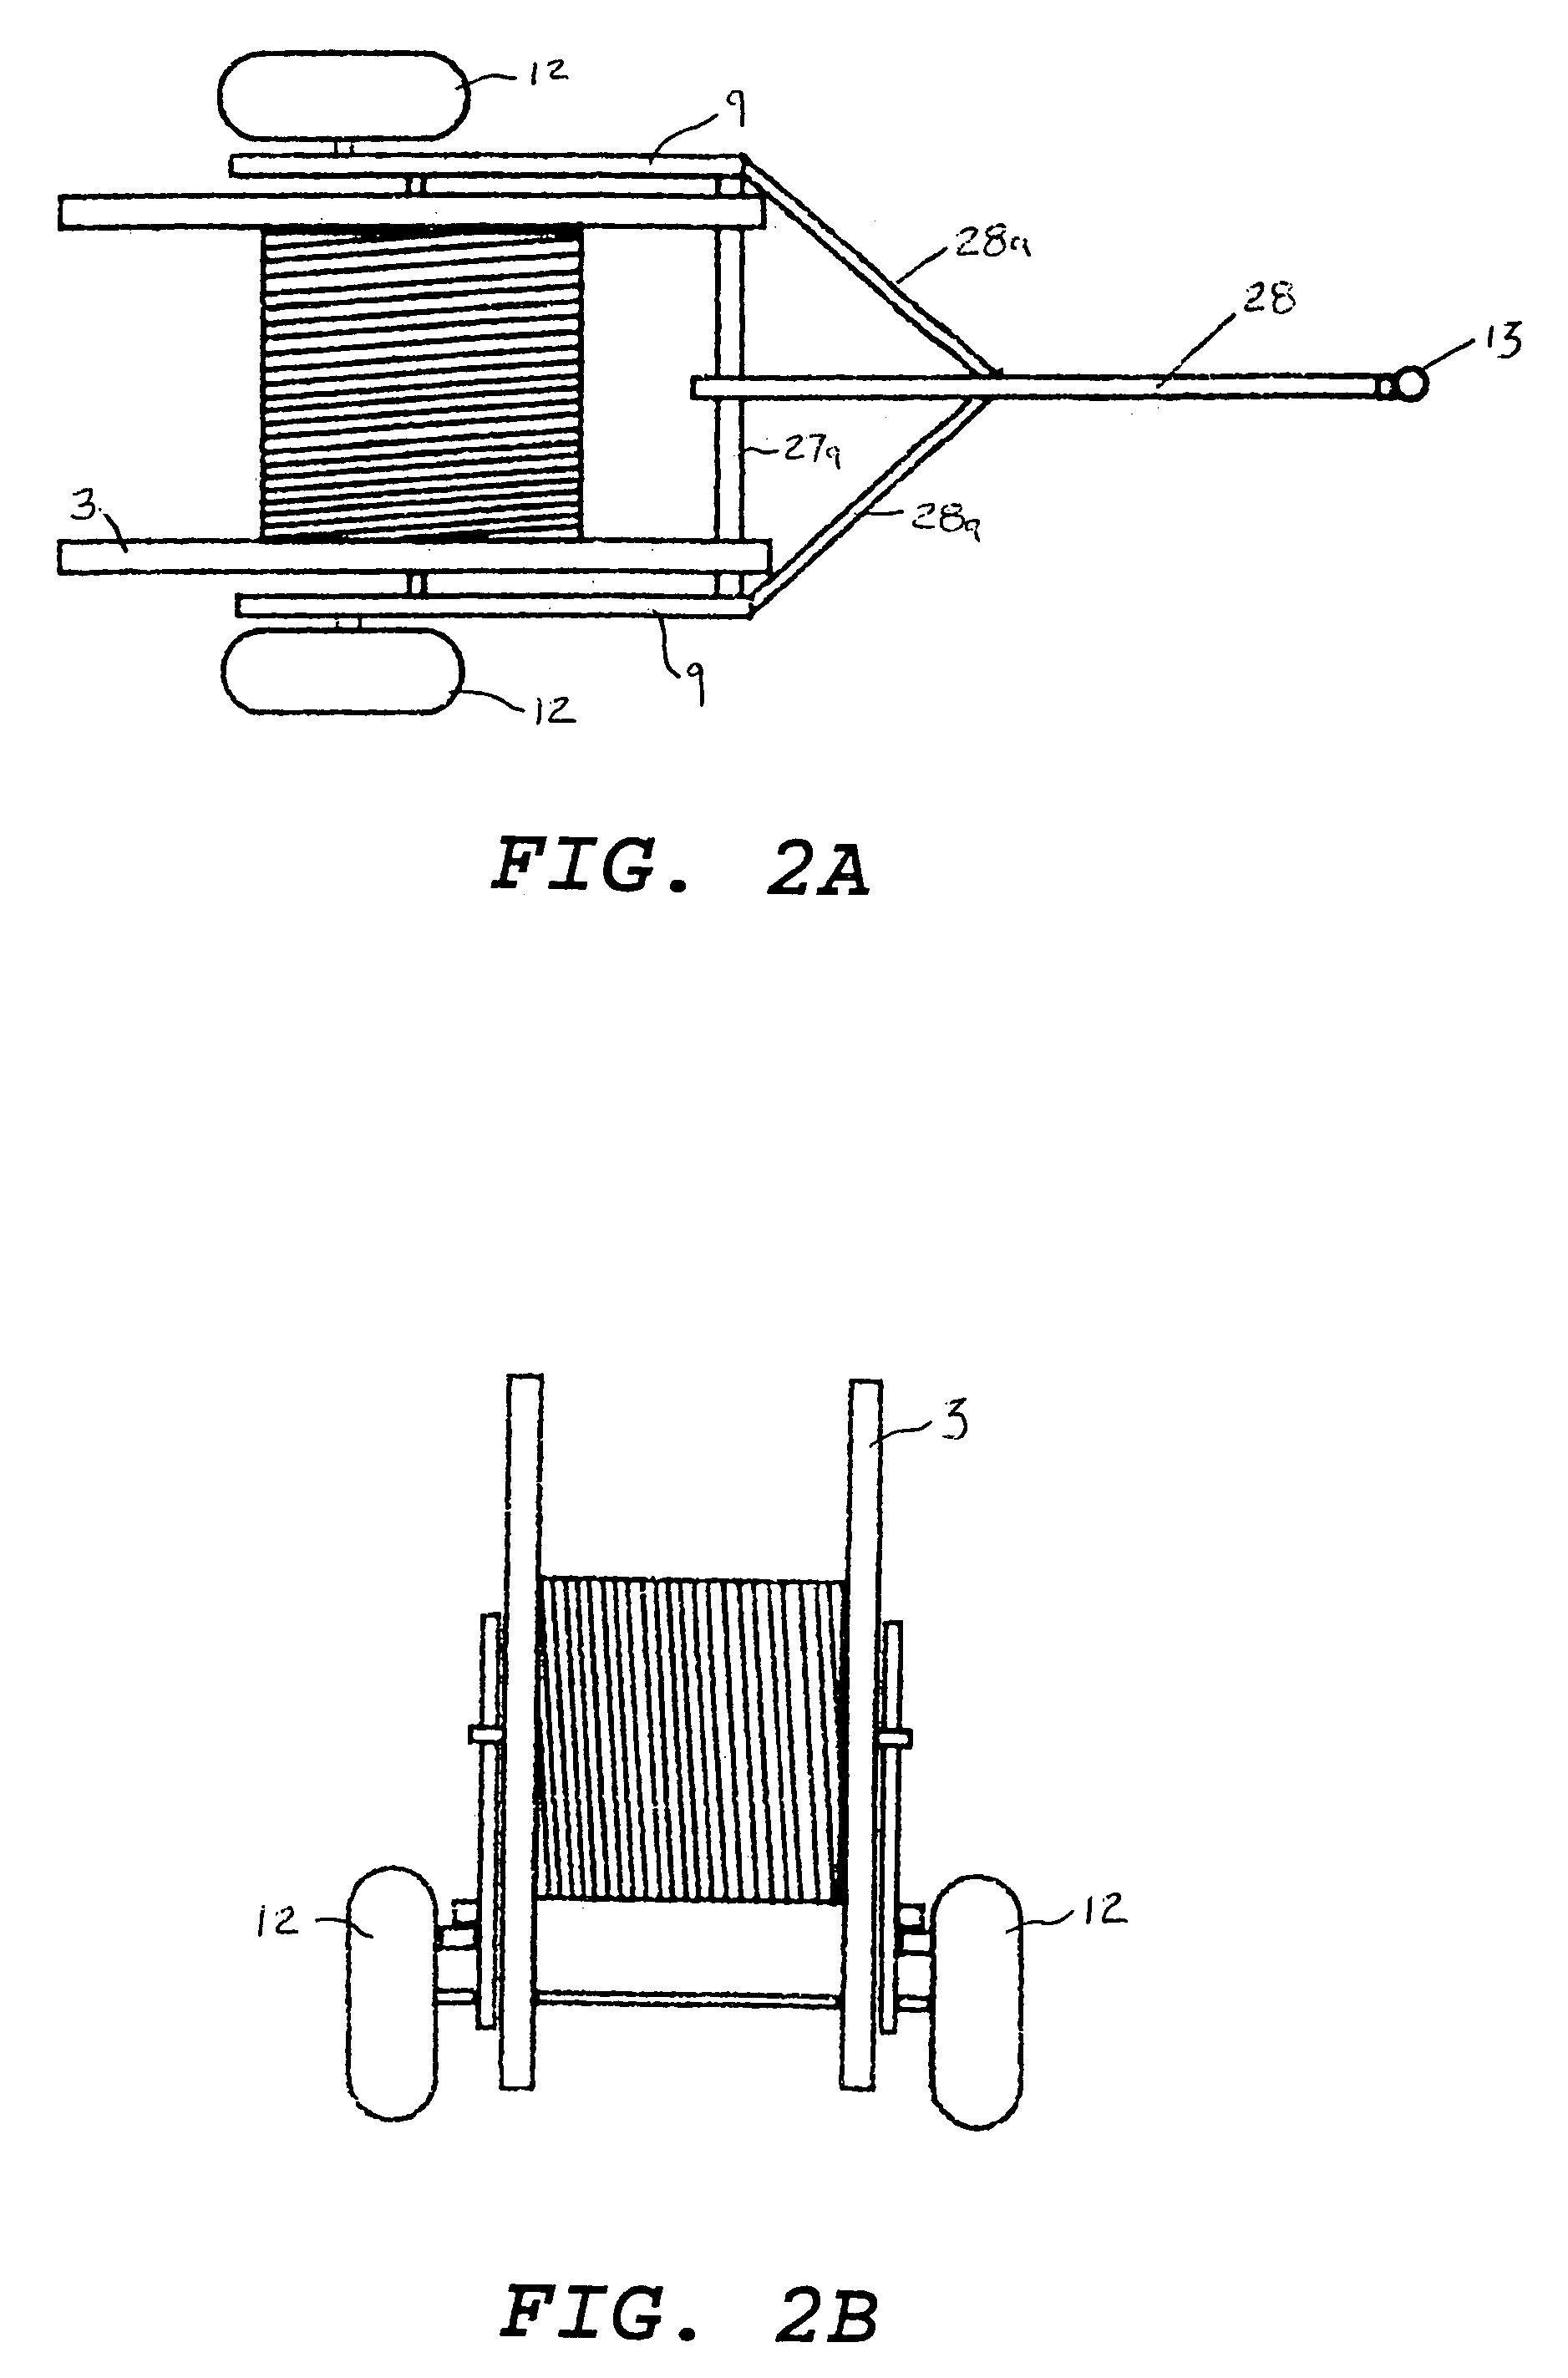 Cable transport system and method for loading and unloading spools